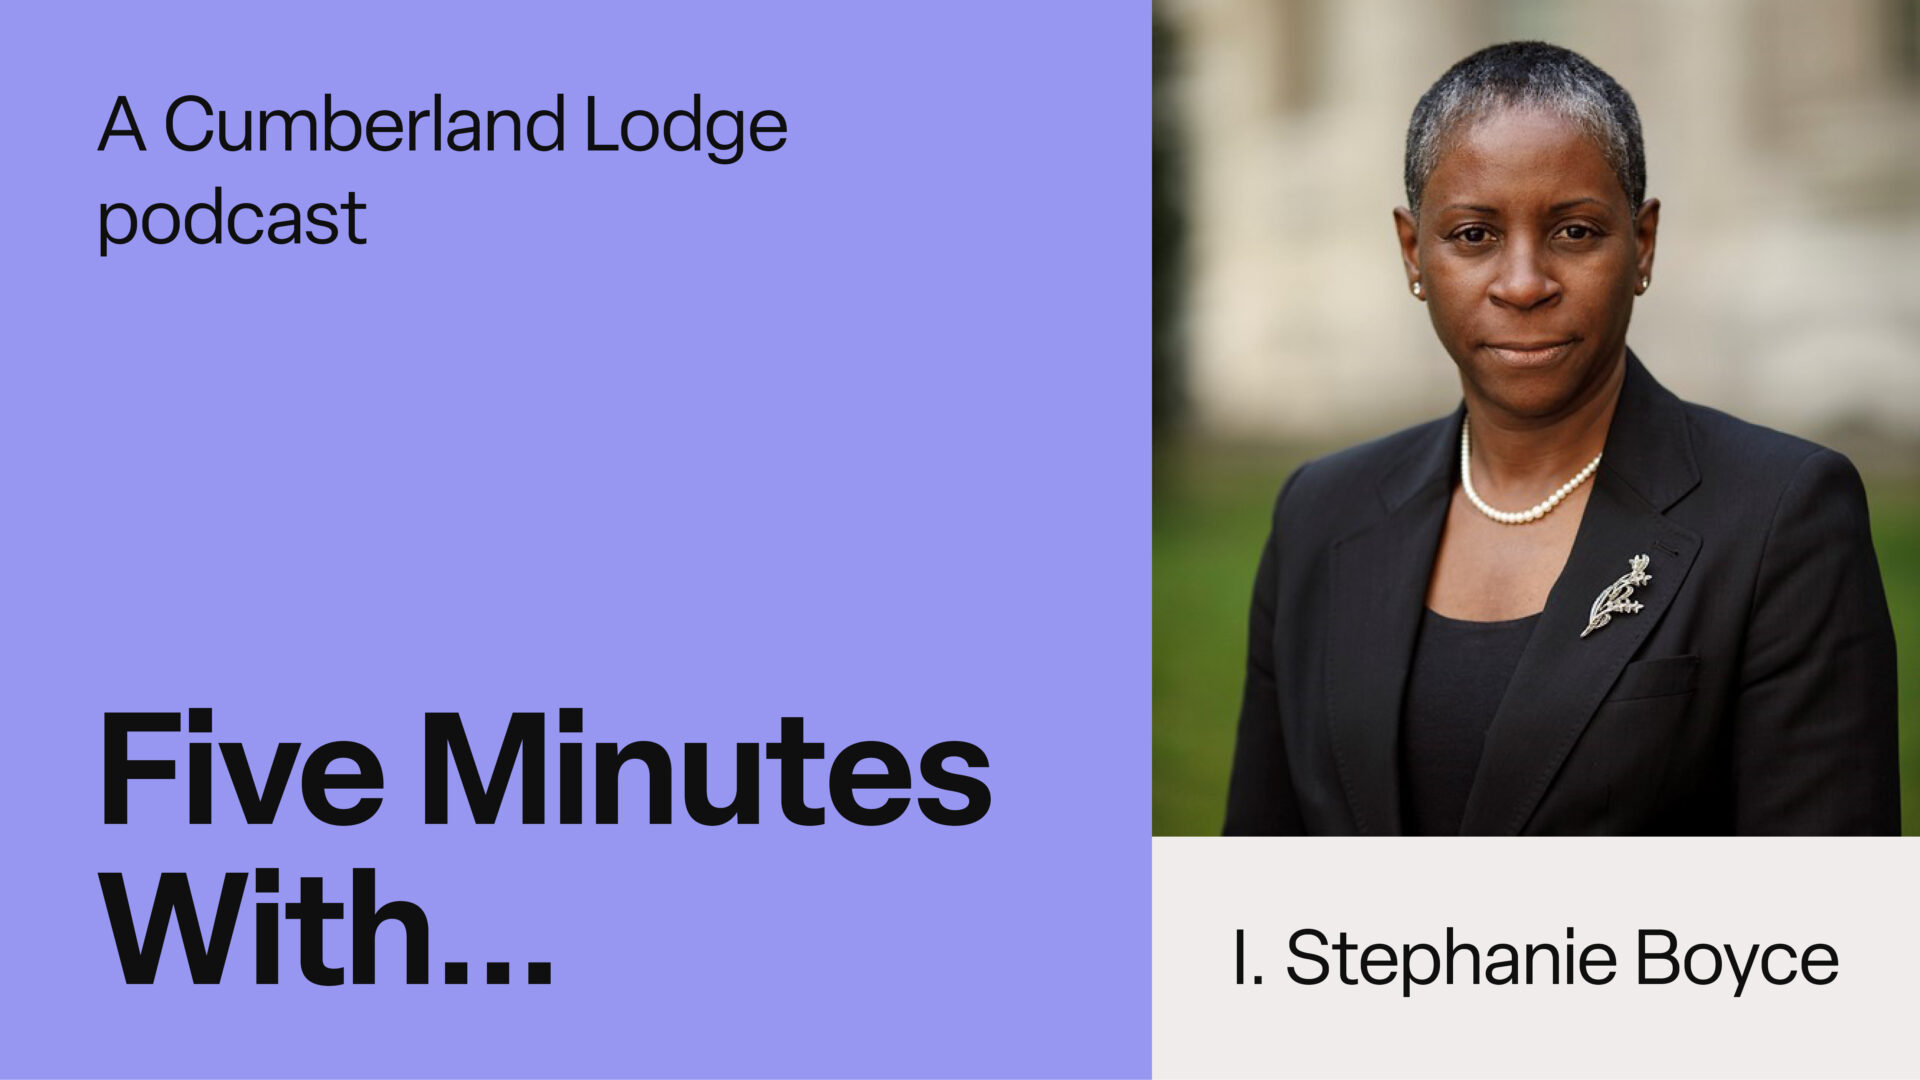 TEXT: A Cumberland Lodge podcast. Five Minutes With... Stephanie Boyce